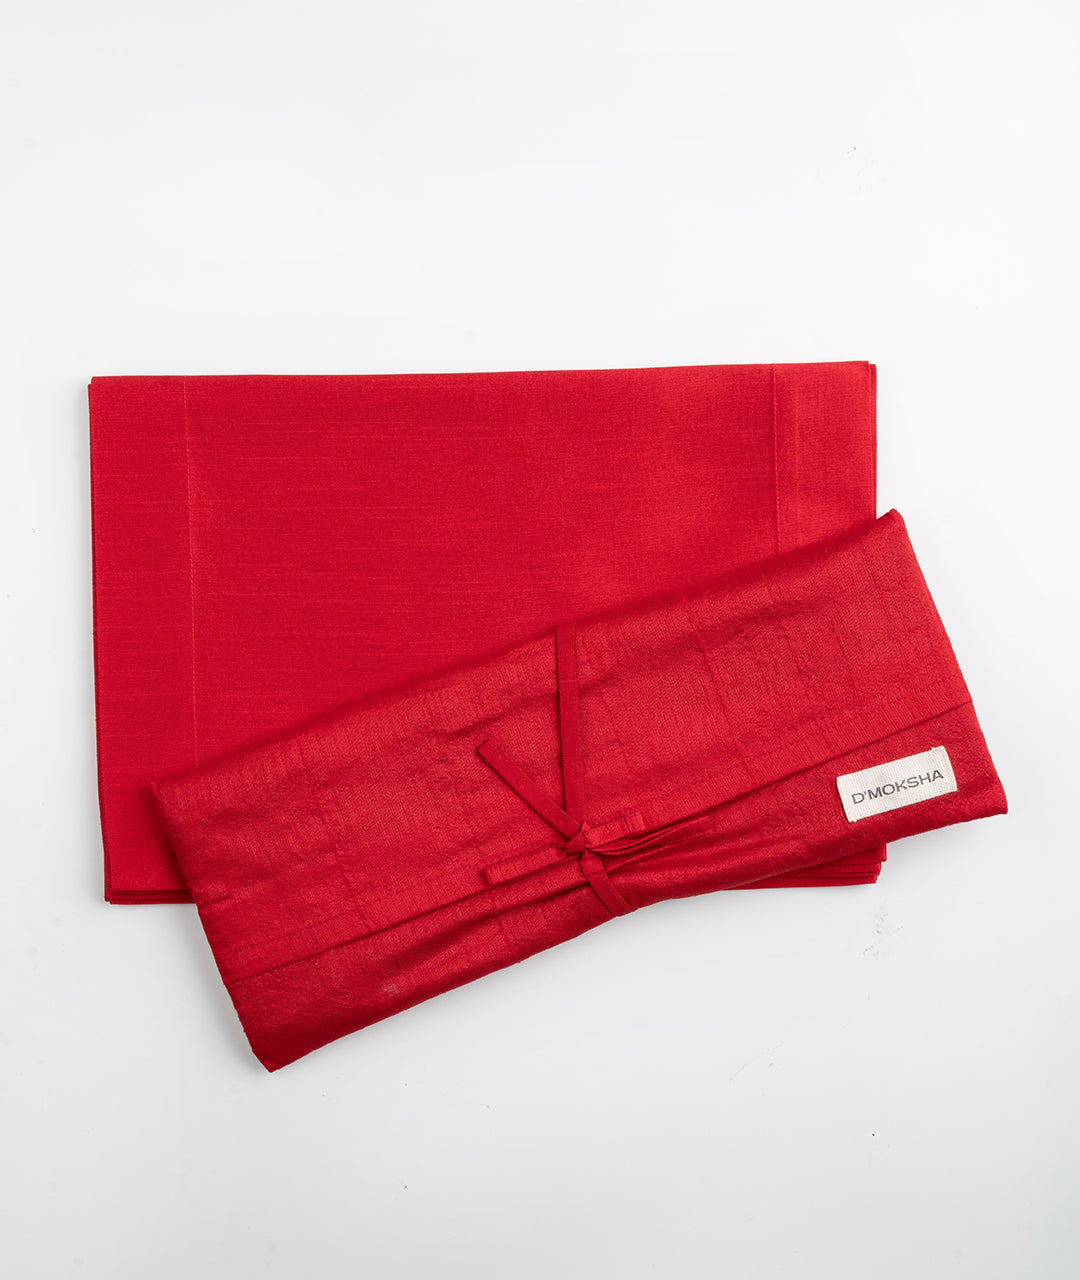 Tango Red Silk Textured Placemats 14 x 19 Inch Set of 4 - Mitered Corner